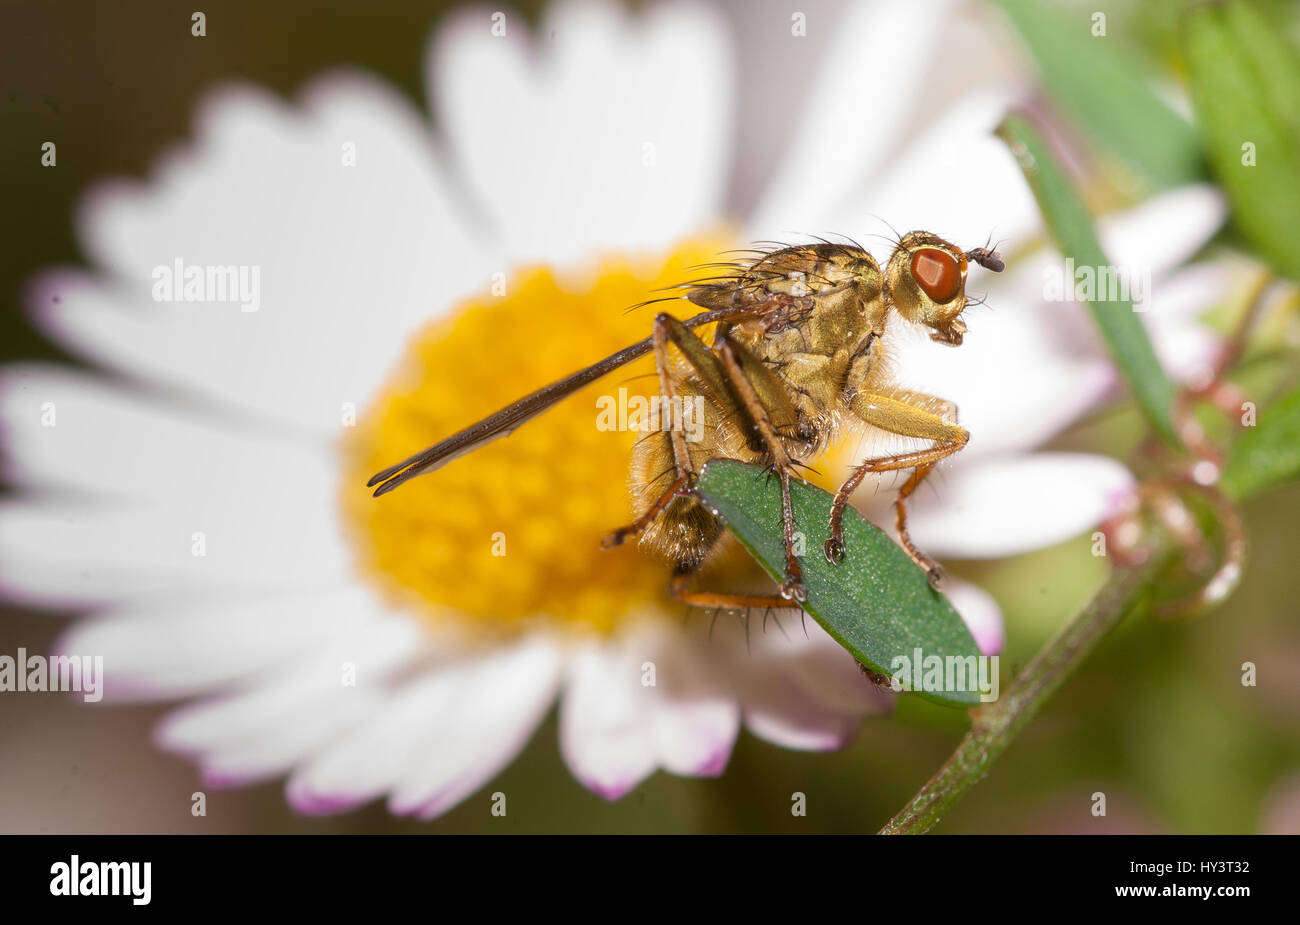 Common flesh fly (Sarcophaga carnaria) perched on a flower Stock Photo